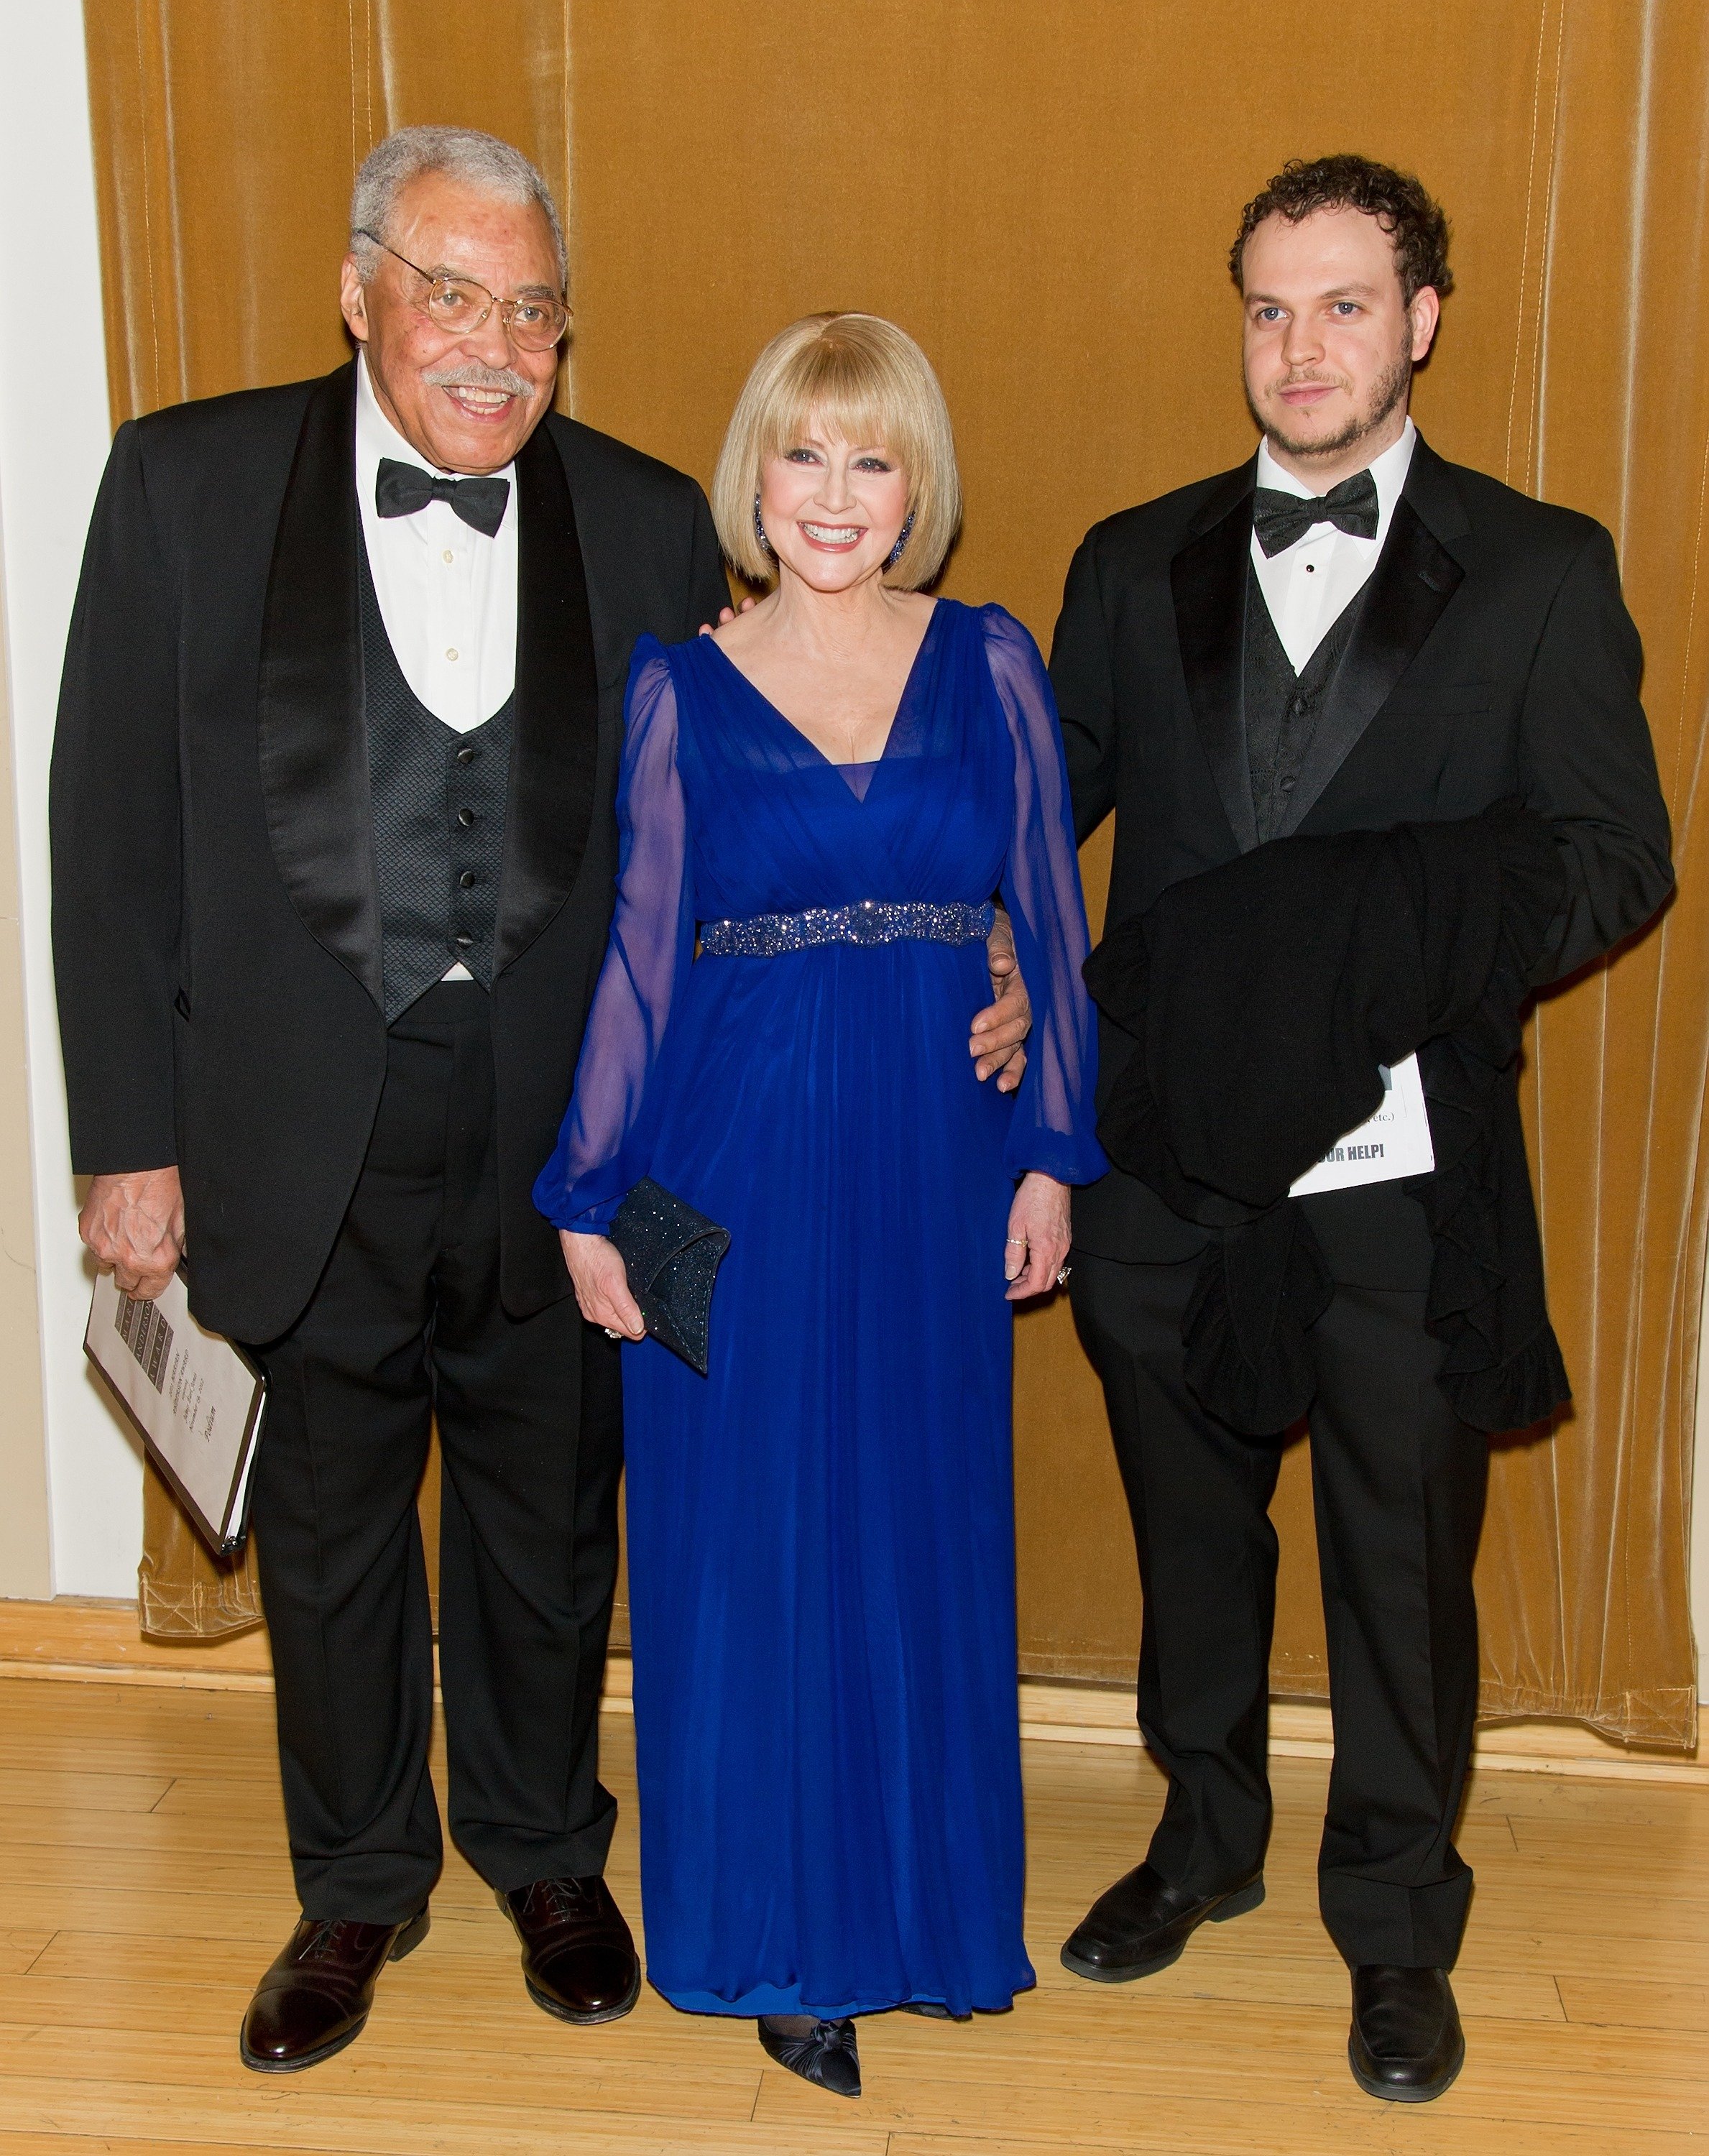 Honoree Actor James Earl Jones, wife Cecelia Hart and son Flynn Earl Jones attend the 2012 Marian Anderson awards gala at Kimmel Center for the Performing Arts on November 19, 2012 in Philadelphia, Pennsylvania | Source: Getty Images 